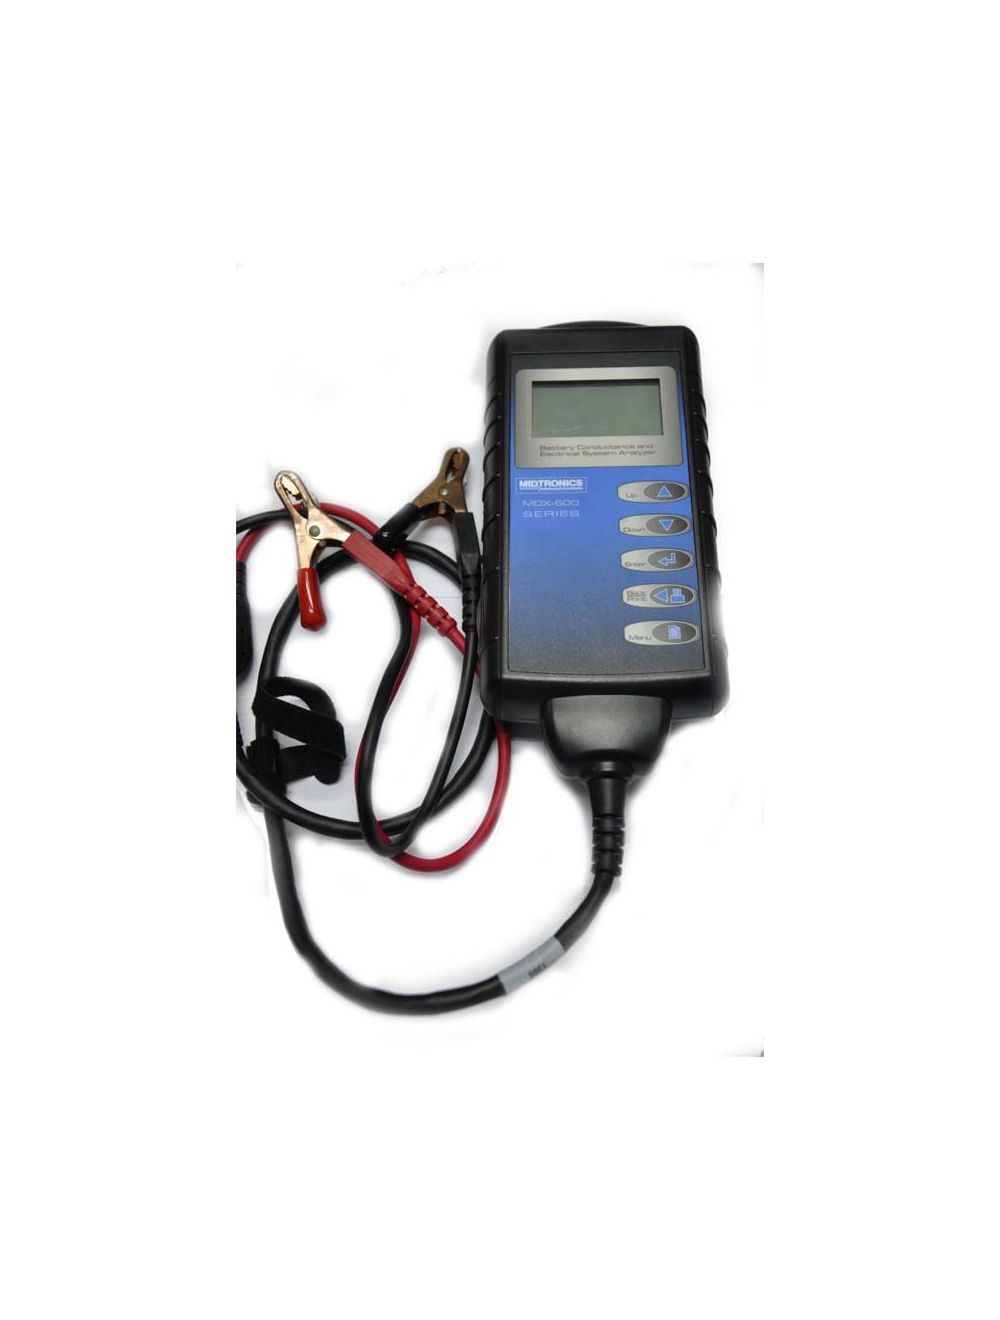 New In stock for sale, Midtronics Conductivity Meter MDX641P